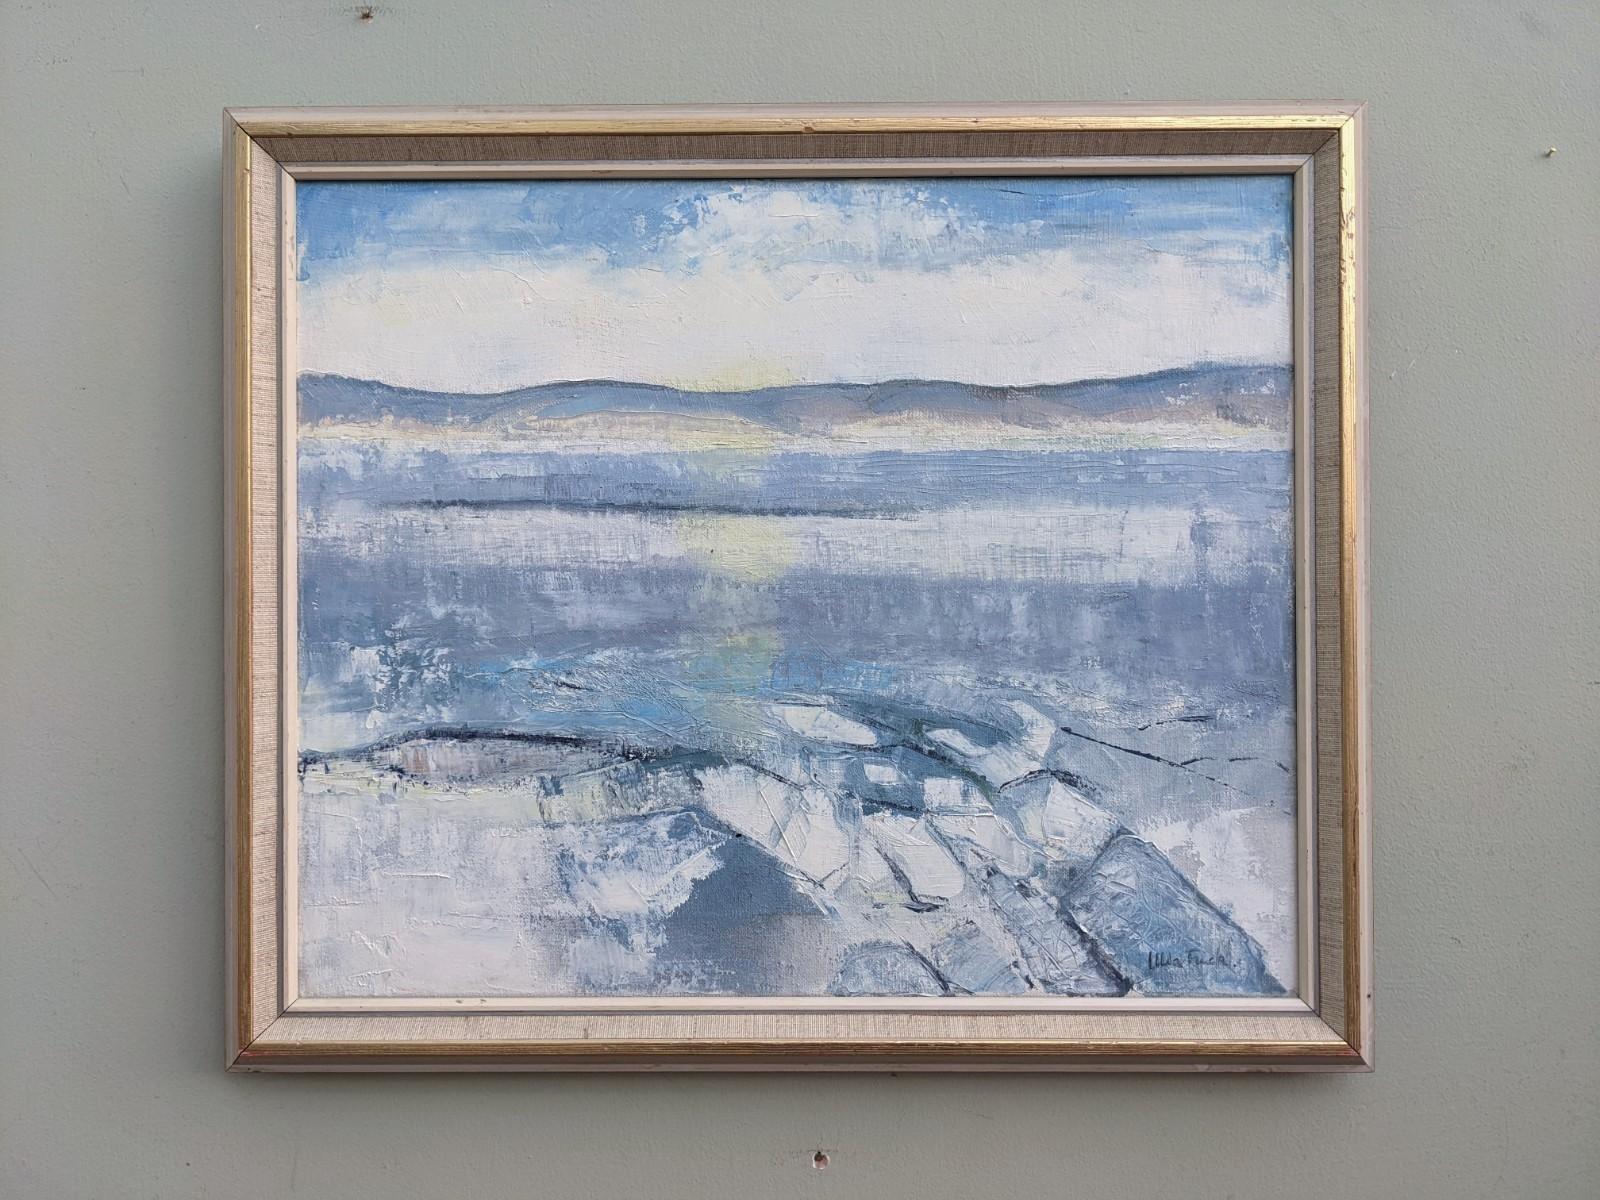 Vintage Mid Century Framed Oil Painting, Abstract Coastal Landscape - Icy Winter